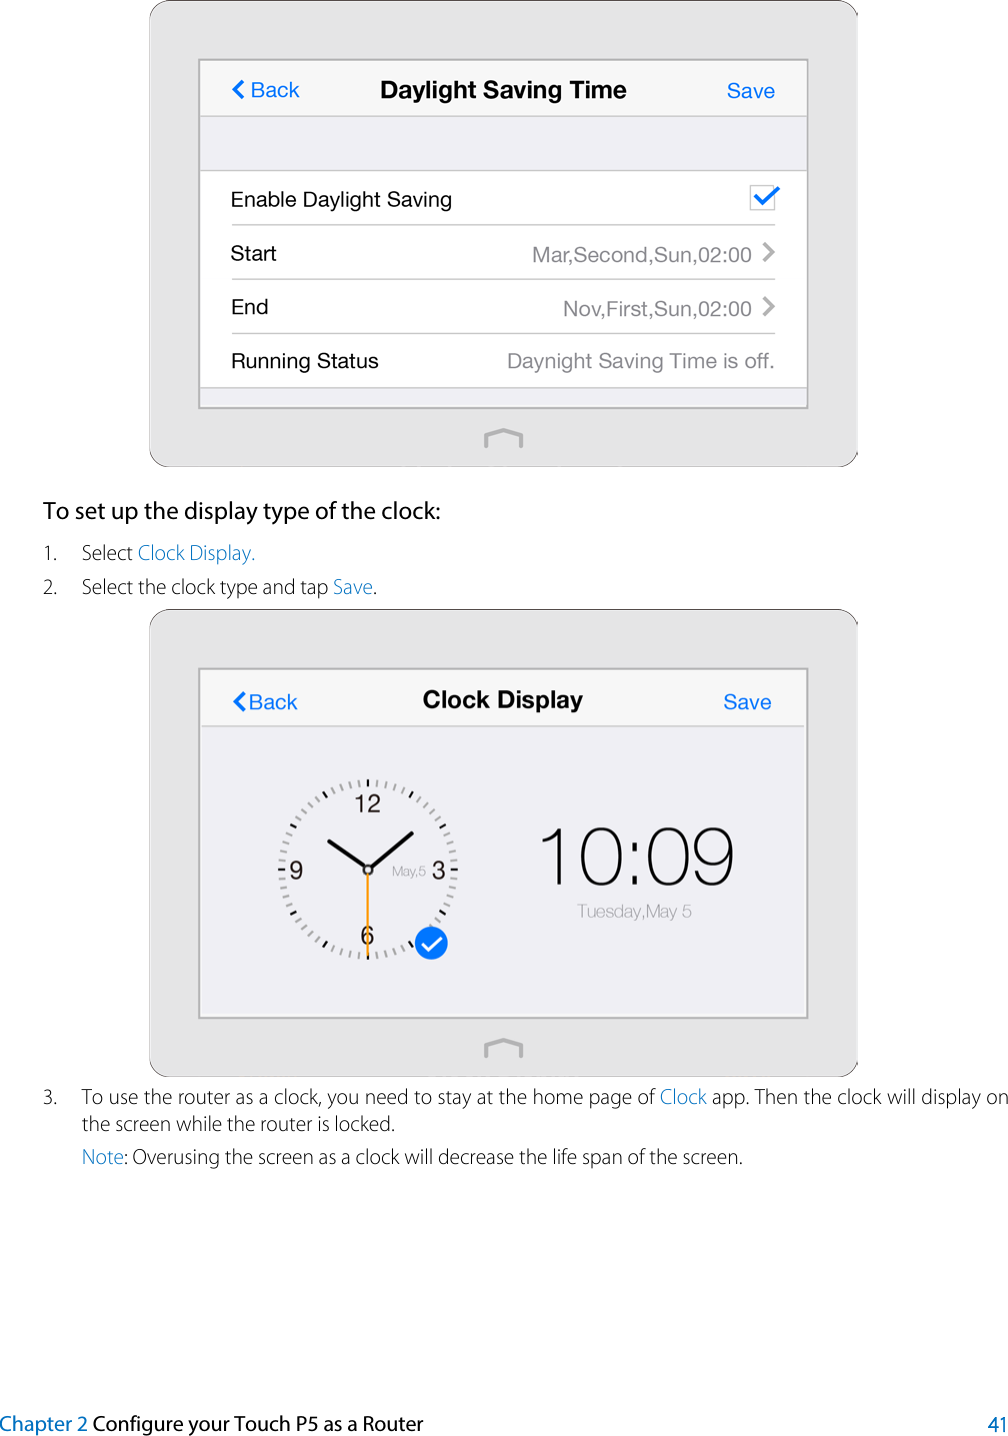   To set up the display type of the clock: 1. Select Clock Display. 2. Select the clock type and tap Save.  3. To use the router as a clock, you need to stay at the home page of Clock app. Then the clock will display on the screen while the router is locked. Note: Overusing the screen as a clock will decrease the life span of the screen.     Chapter 2 Configure your Touch P5 as a Router 41 